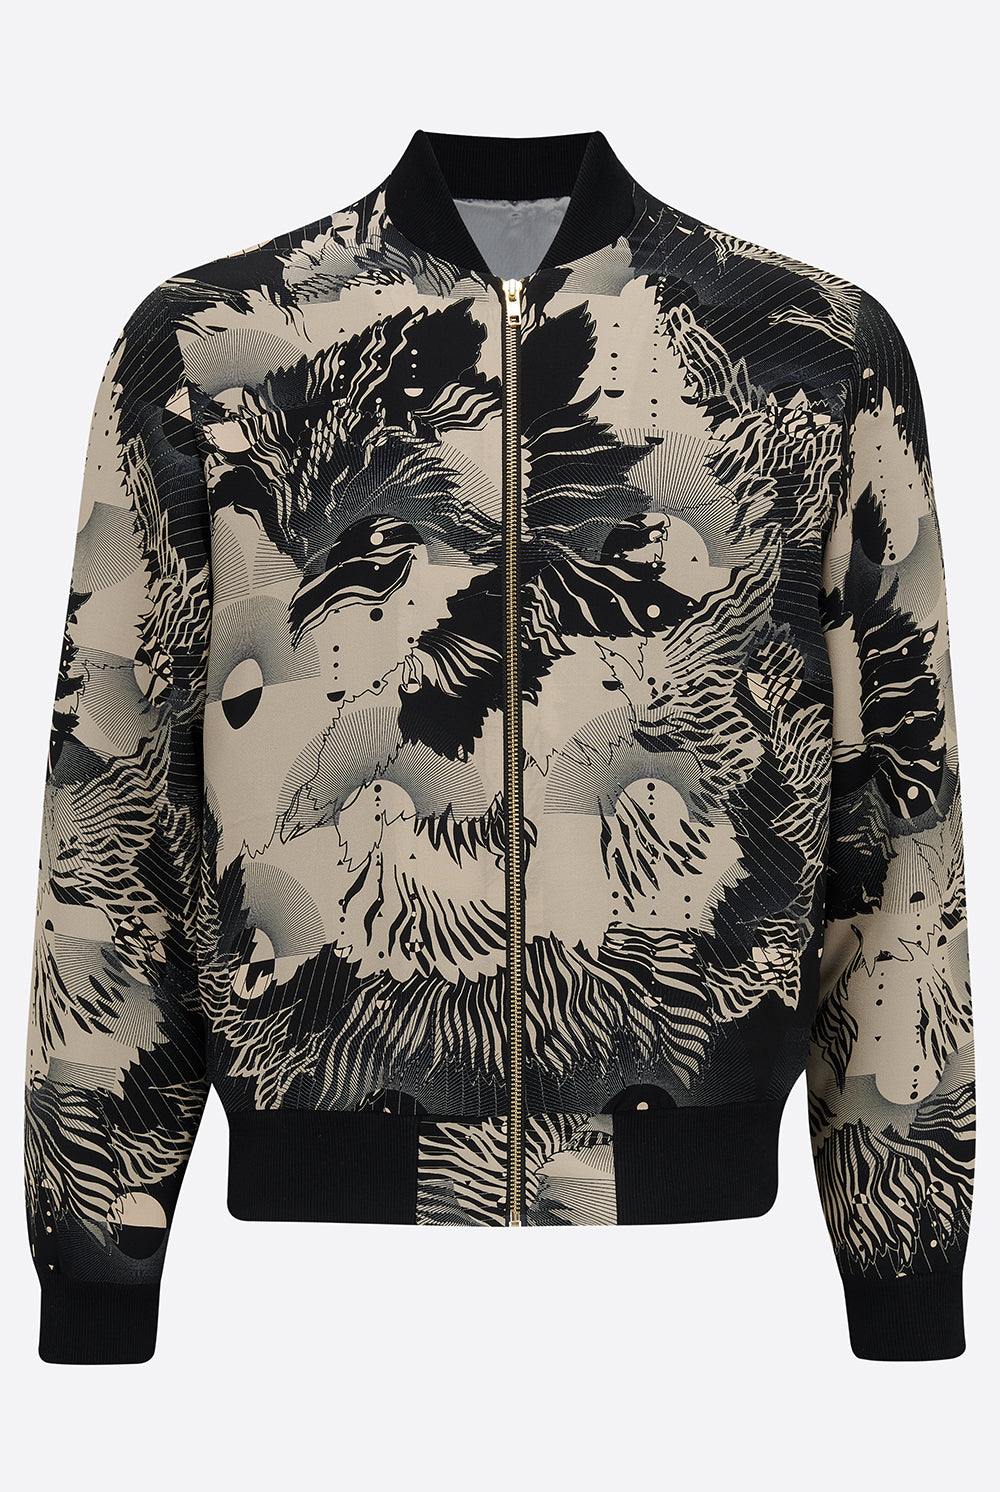 The front of a silk mens bomber jacker in a deep navy and cream print abstract floral print